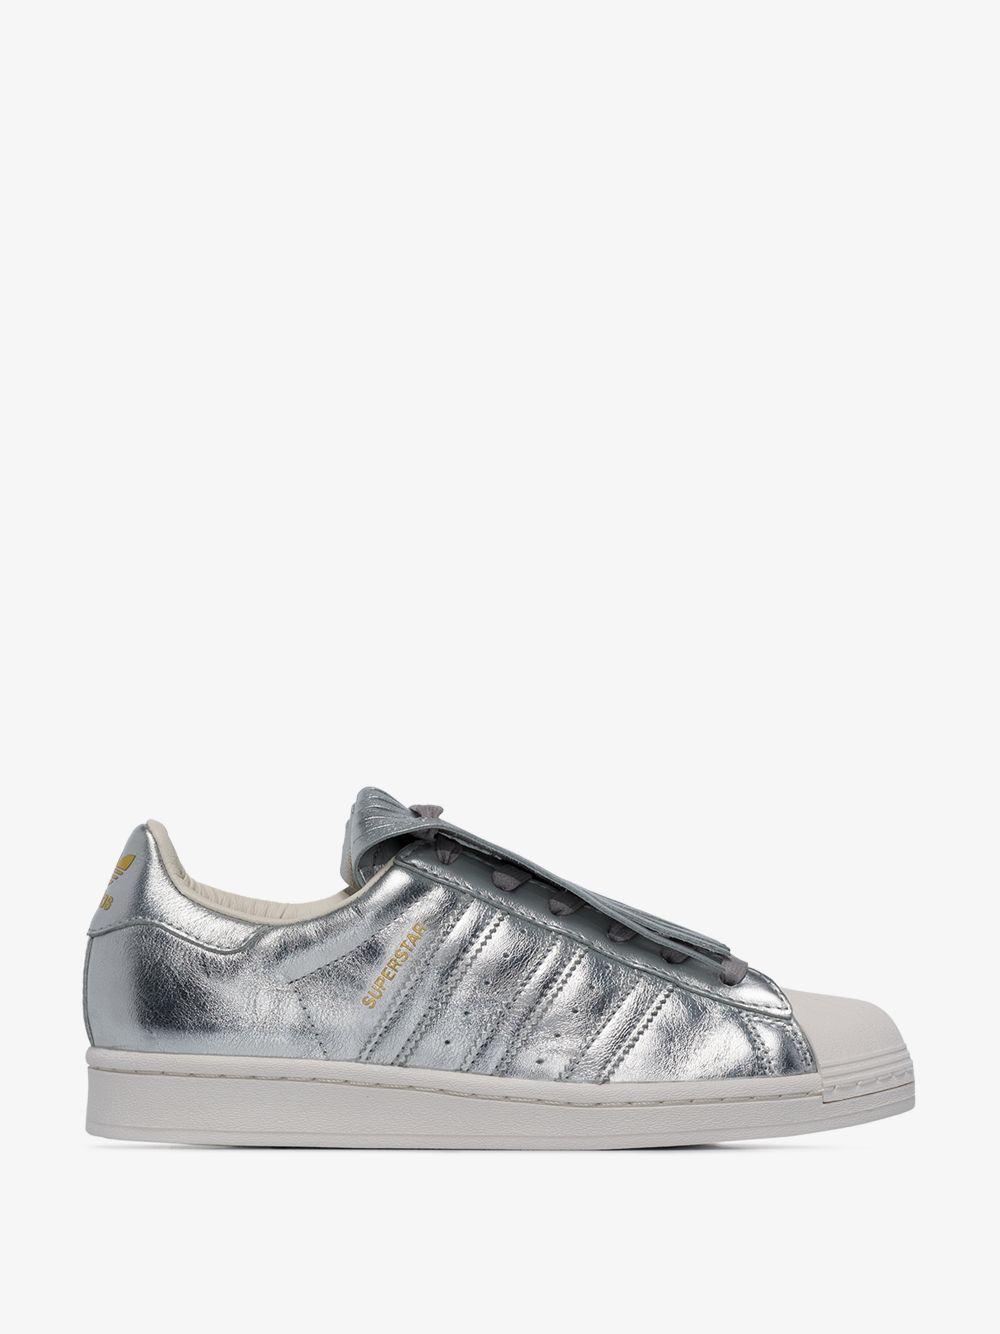 adidas Leather Superstar Fr Sneakers in Silver (Metallic) - Lyst